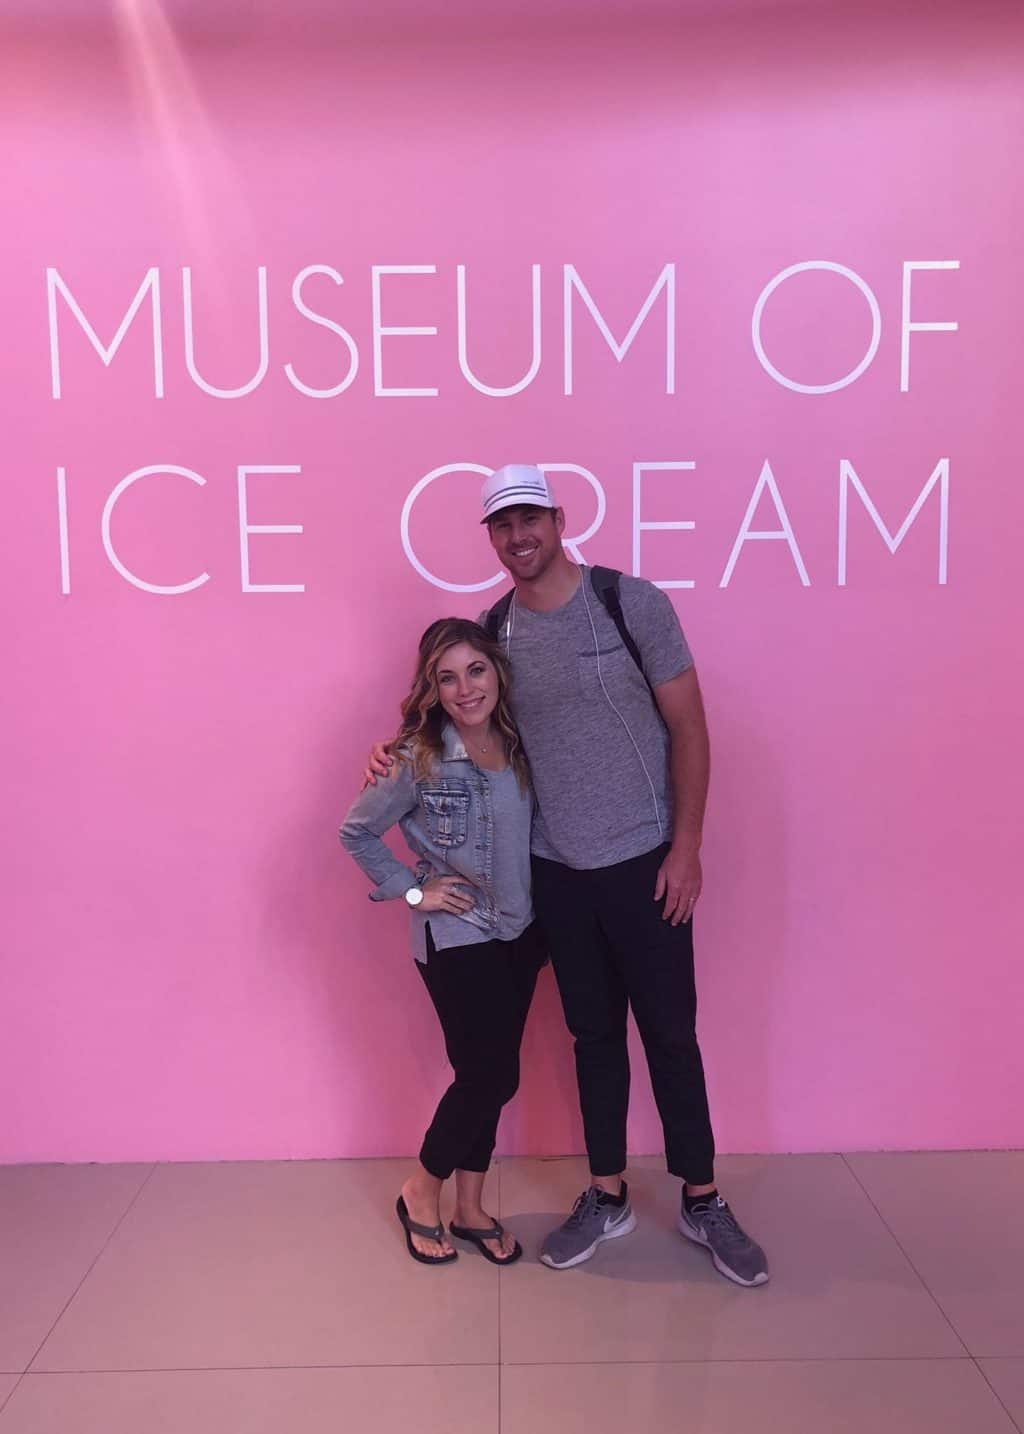 San Fran Trip Part 2: Fisherman’s Wharf, Pier 39, Museum of Ice Cream and More